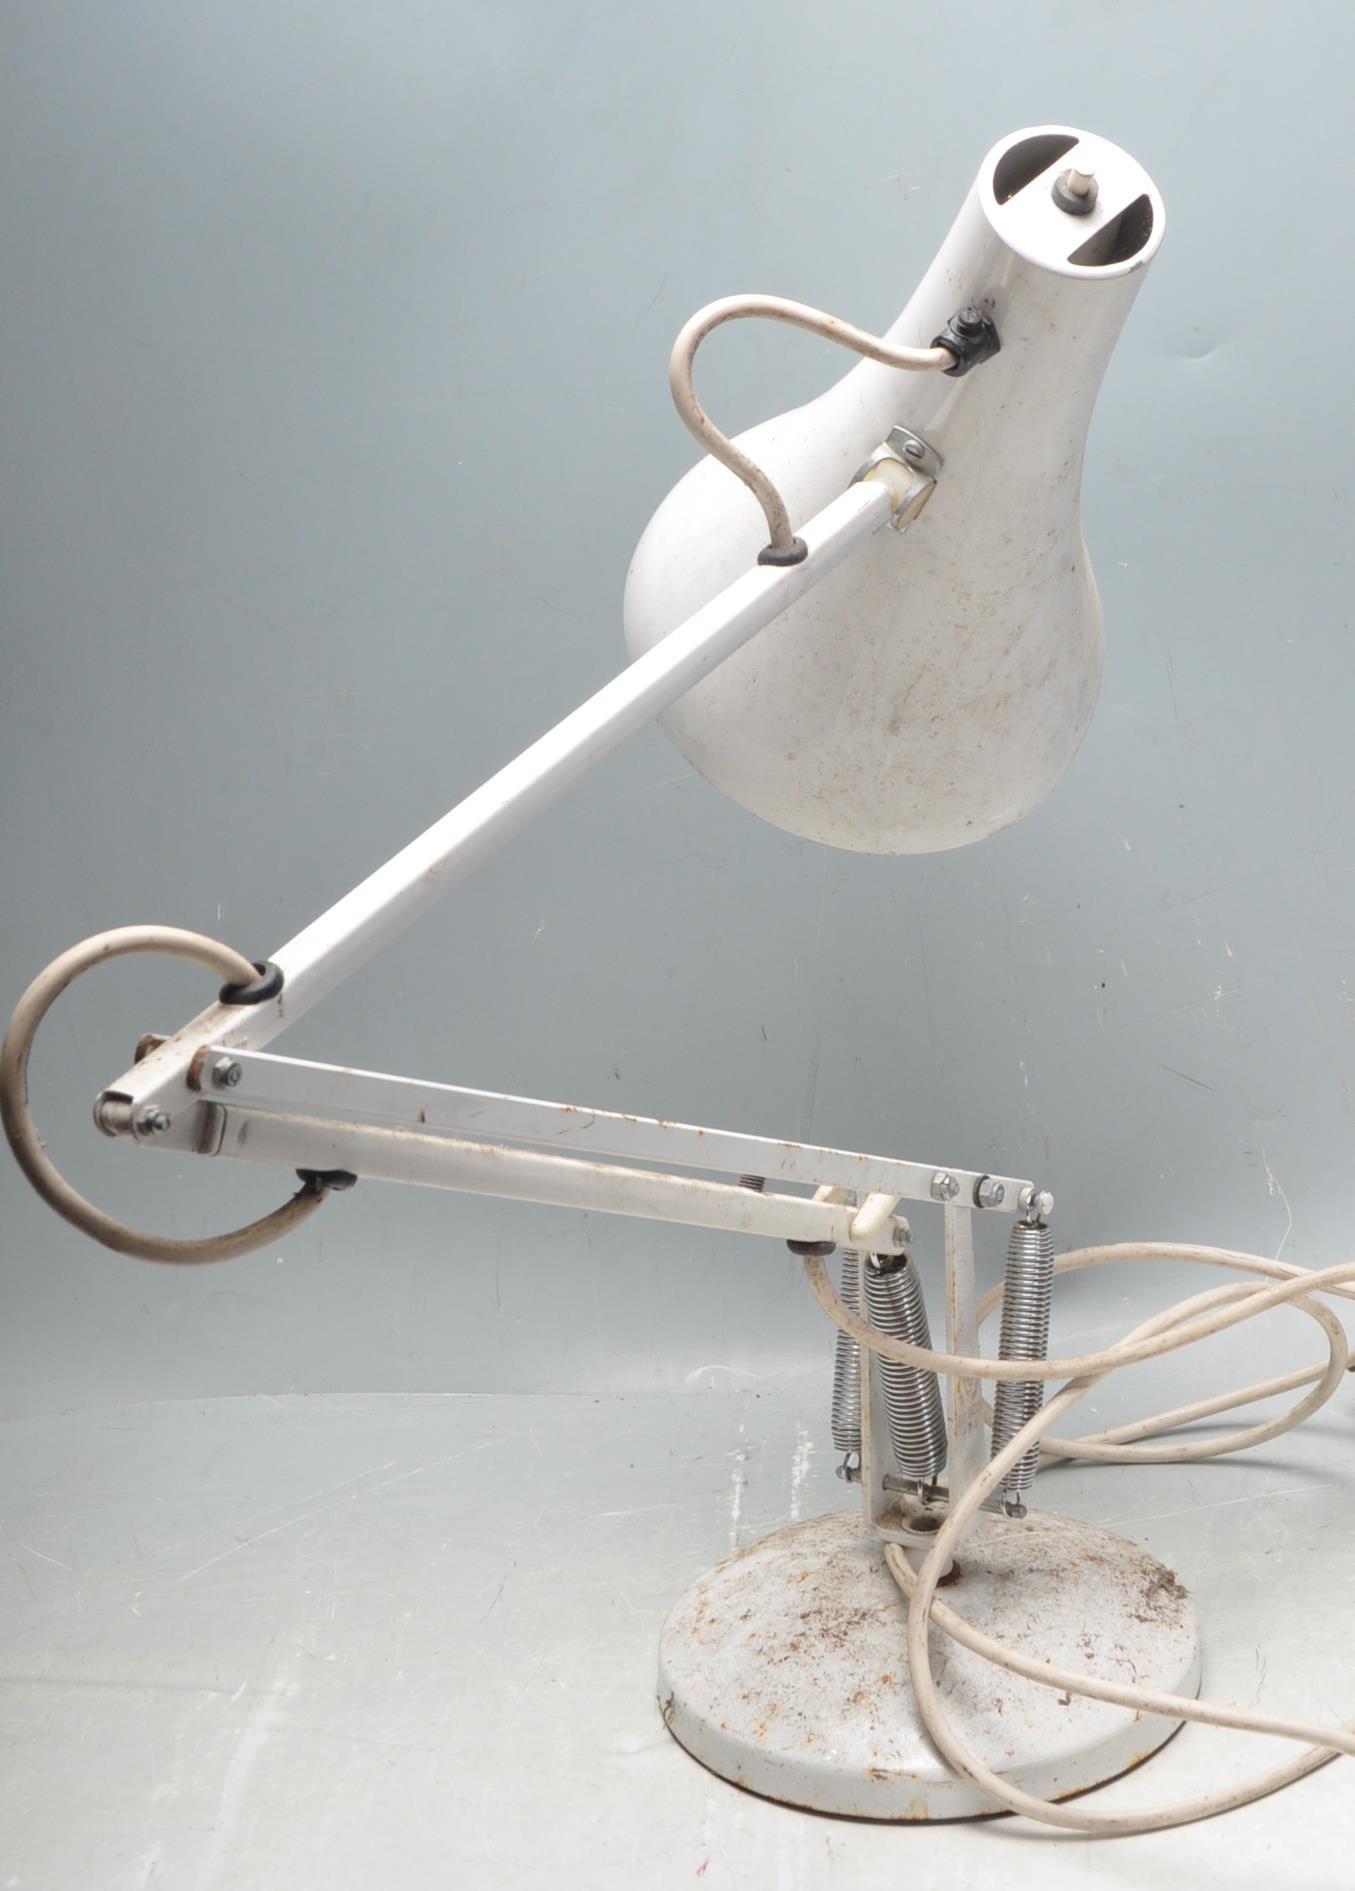 RETRO VINTAGE INDUSTRIAL 20TH CENTURY HERBERT TERRY ANGLEPOISE LAMP - Image 3 of 5